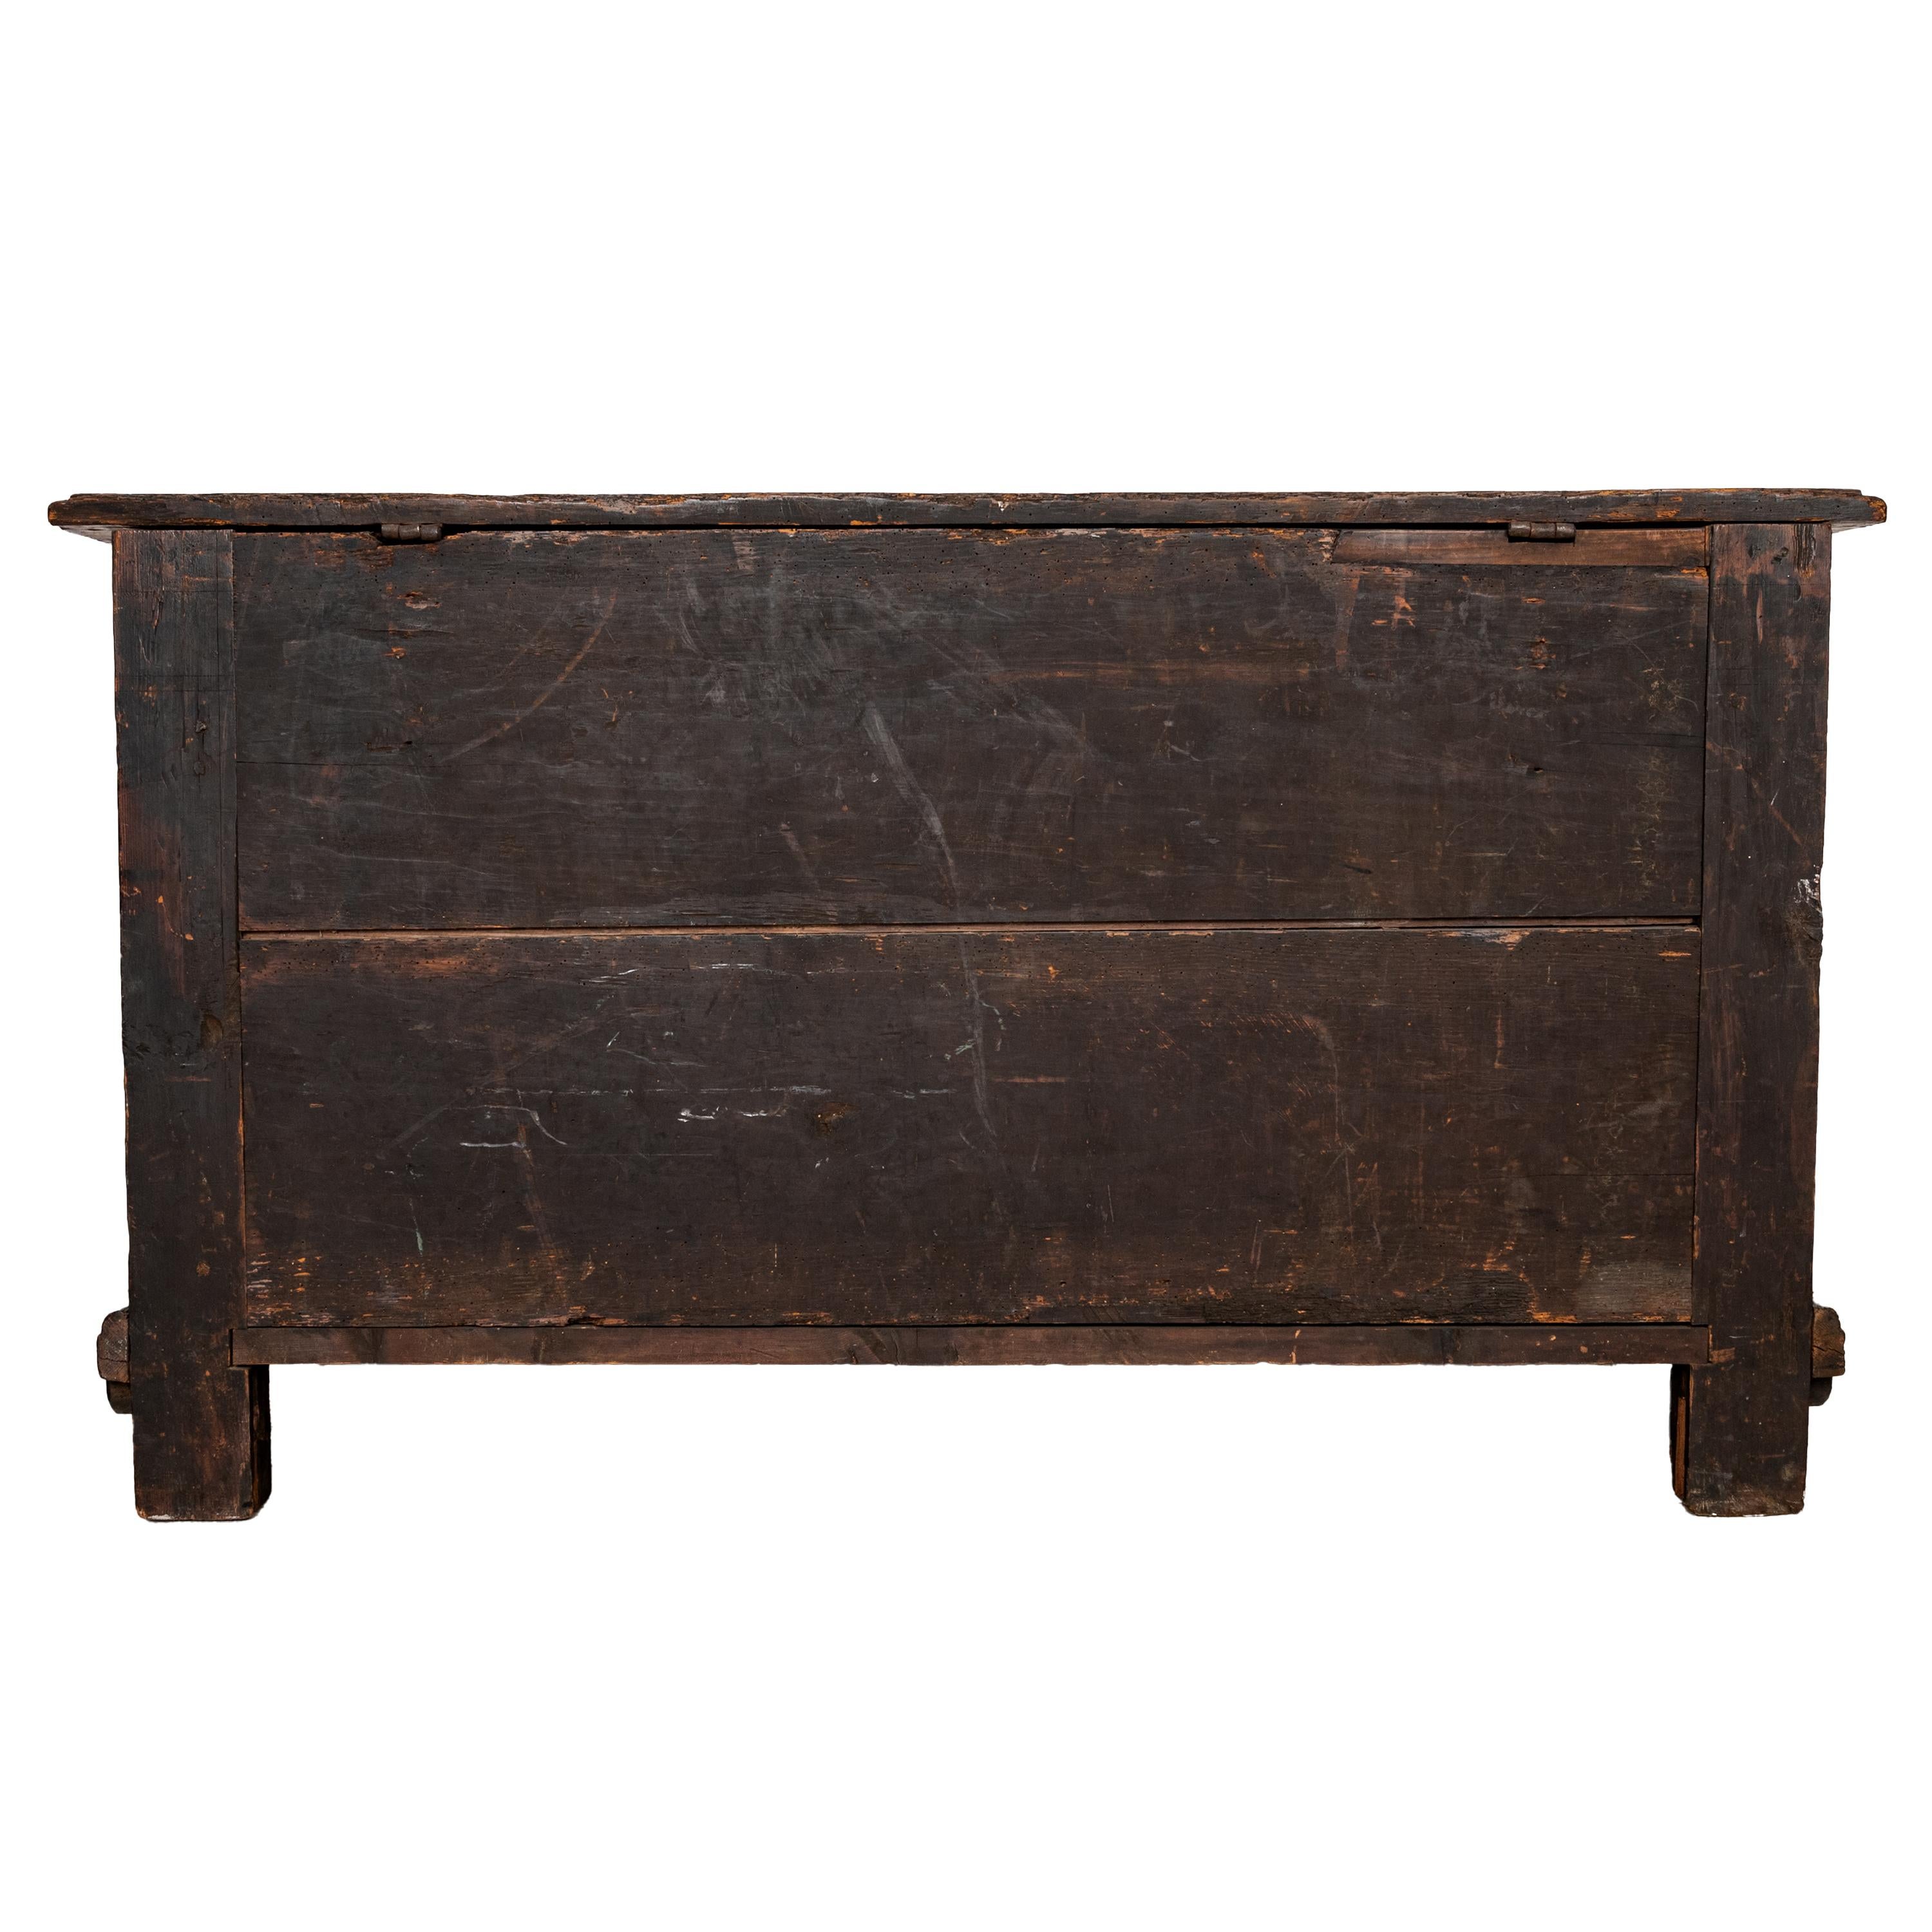 Antique 18th Century Spanish Colonial Carved Cedar Coffer Chest Mexico 1750 For Sale 7